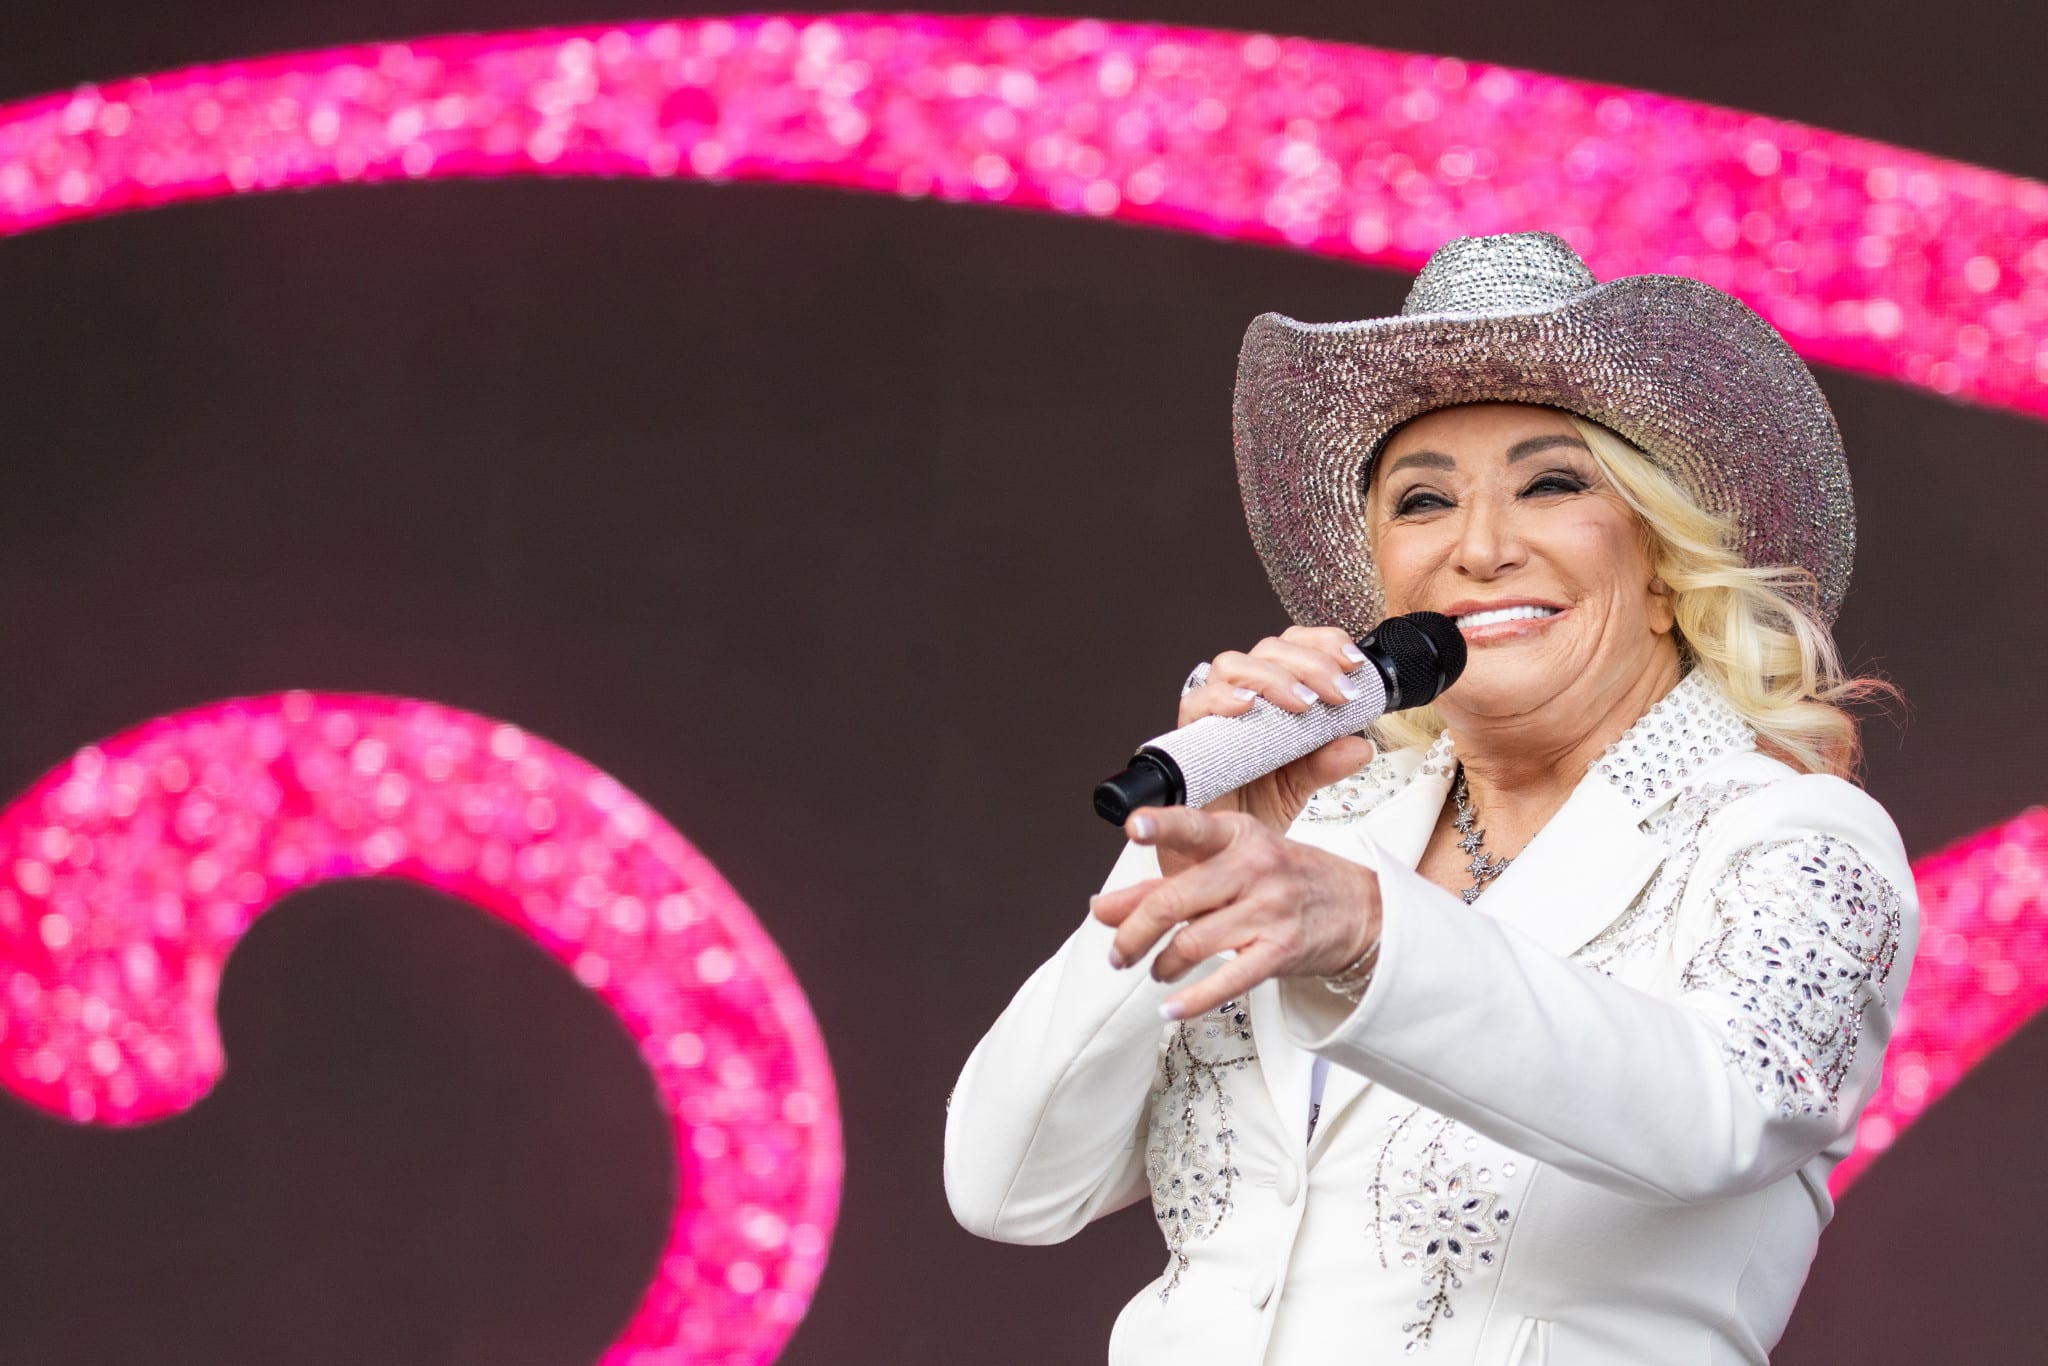 Tanya Tucker is another country singer from Texas